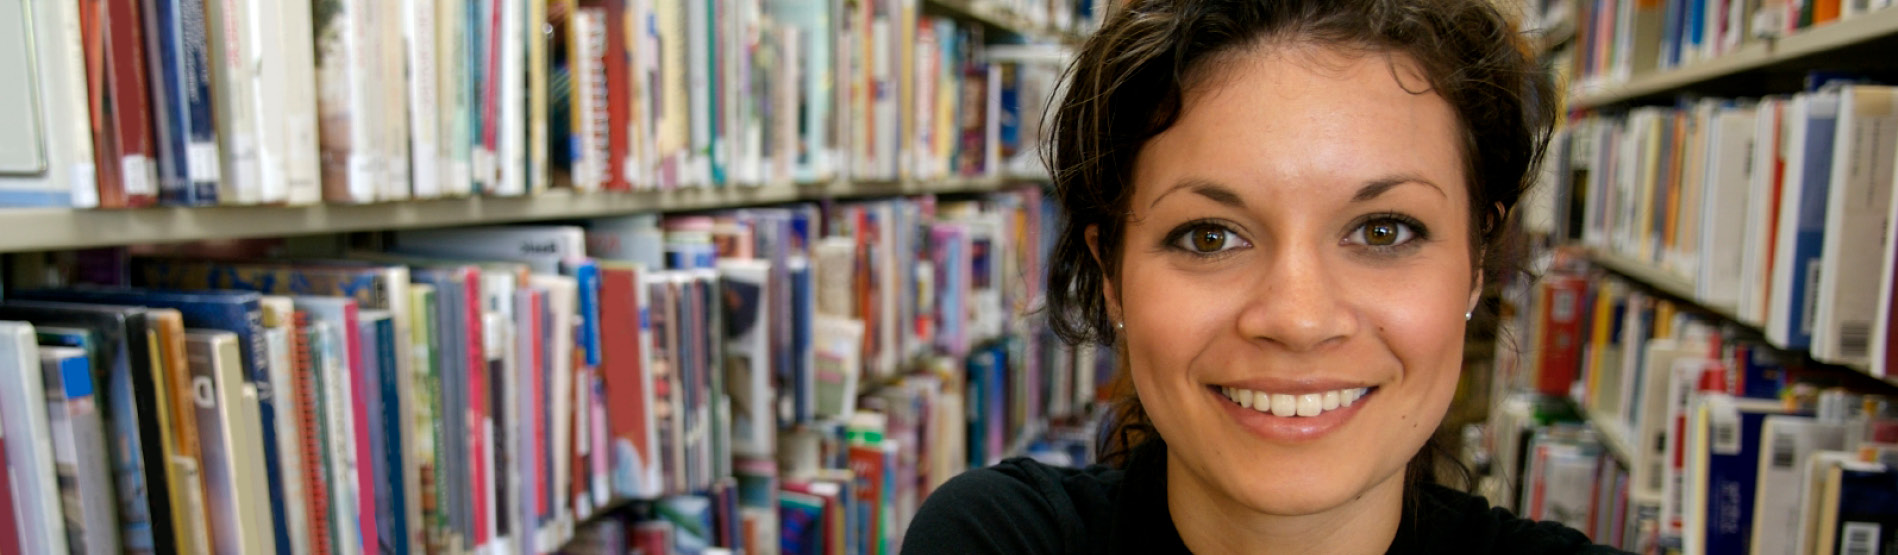 Female student in the library smiling